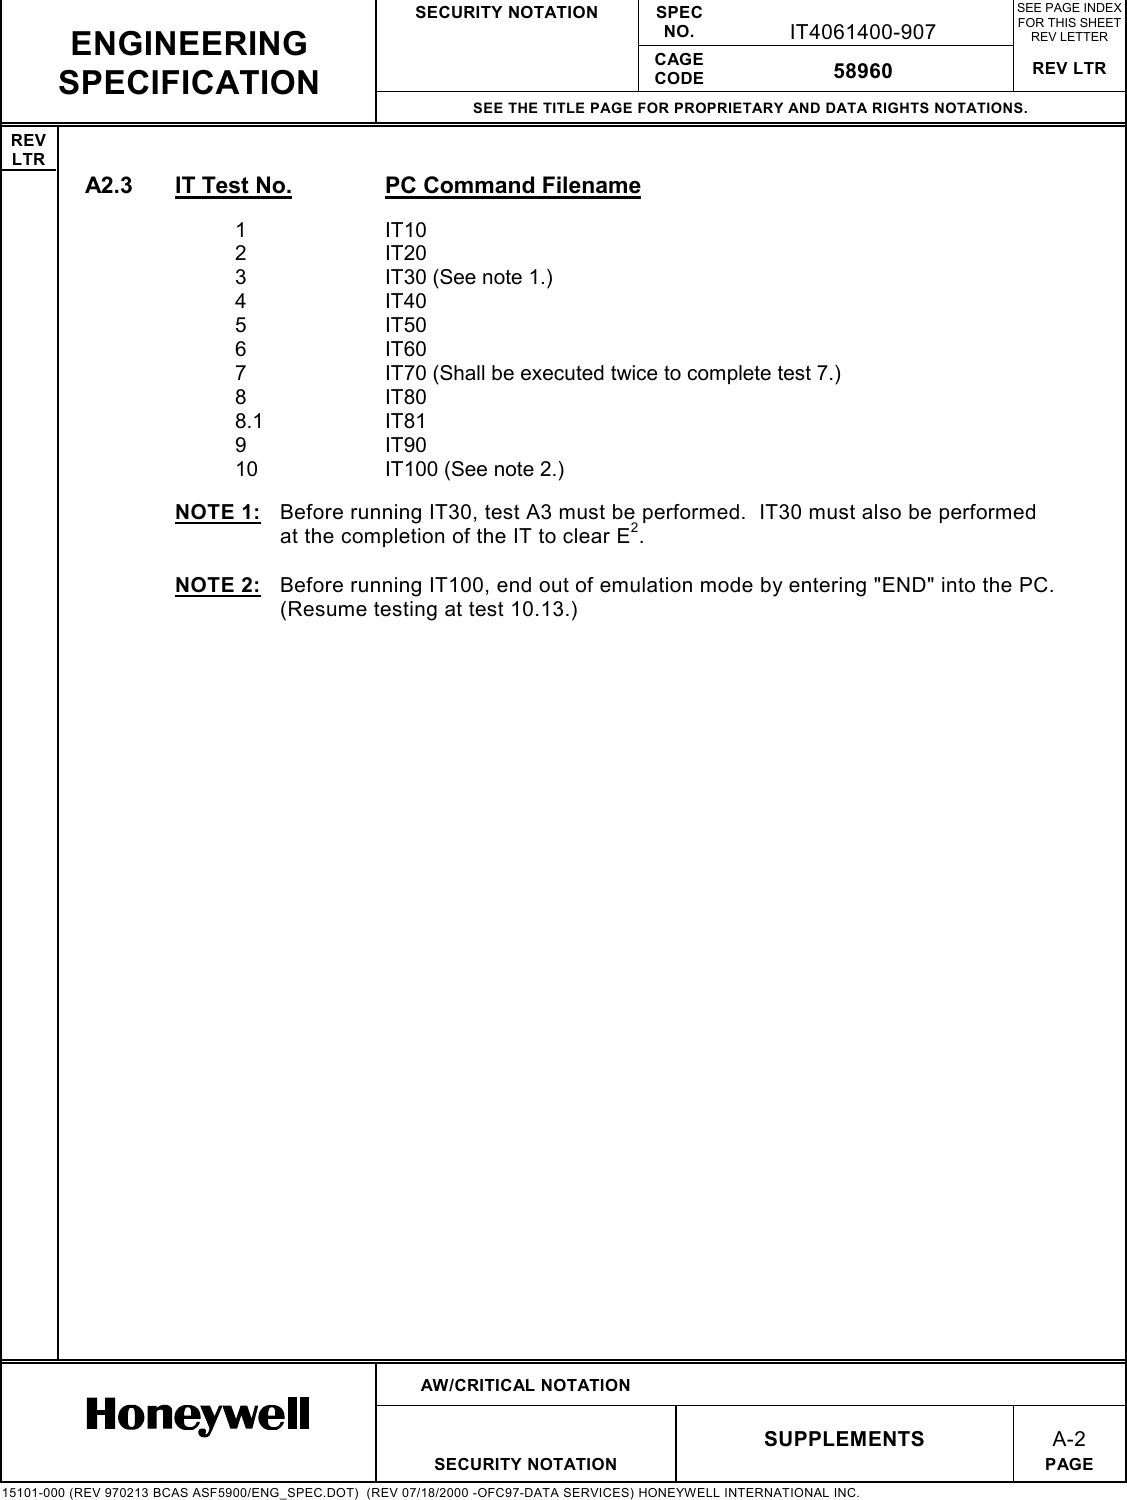 SECURITY NOTATION SPECNO. IT4061400-907SEE PAGE INDEXFOR THIS SHEETREV LETTERCAGECODE 58960 REV LTRSEE THE TITLE PAGE FOR PROPRIETARY AND DATA RIGHTS NOTATIONS.REVLTRAW/CRITICAL NOTATIONSUPPLEMENTSA-2SECURITY NOTATION PAGE15101-000 (REV 970213 BCAS ASF5900/ENG_SPEC.DOT)  (REV 07/18/2000 -OFC97-DATA SERVICES) HONEYWELL INTERNATIONAL INC.ENGINEERINGSPECIFICATIONA2.3  IT Test No. PC Command Filename1IT102IT203 IT30 (See note 1.)4IT405IT506IT607 IT70 (Shall be executed twice to complete test 7.)8IT808.1 IT819IT9010 IT100 (See note 2.)NOTE 1:  Before running IT30, test A3 must be performed.  IT30 must also be performedat the completion of the IT to clear E2.NOTE 2:  Before running IT100, end out of emulation mode by entering &quot;END&quot; into the PC.(Resume testing at test 10.13.)